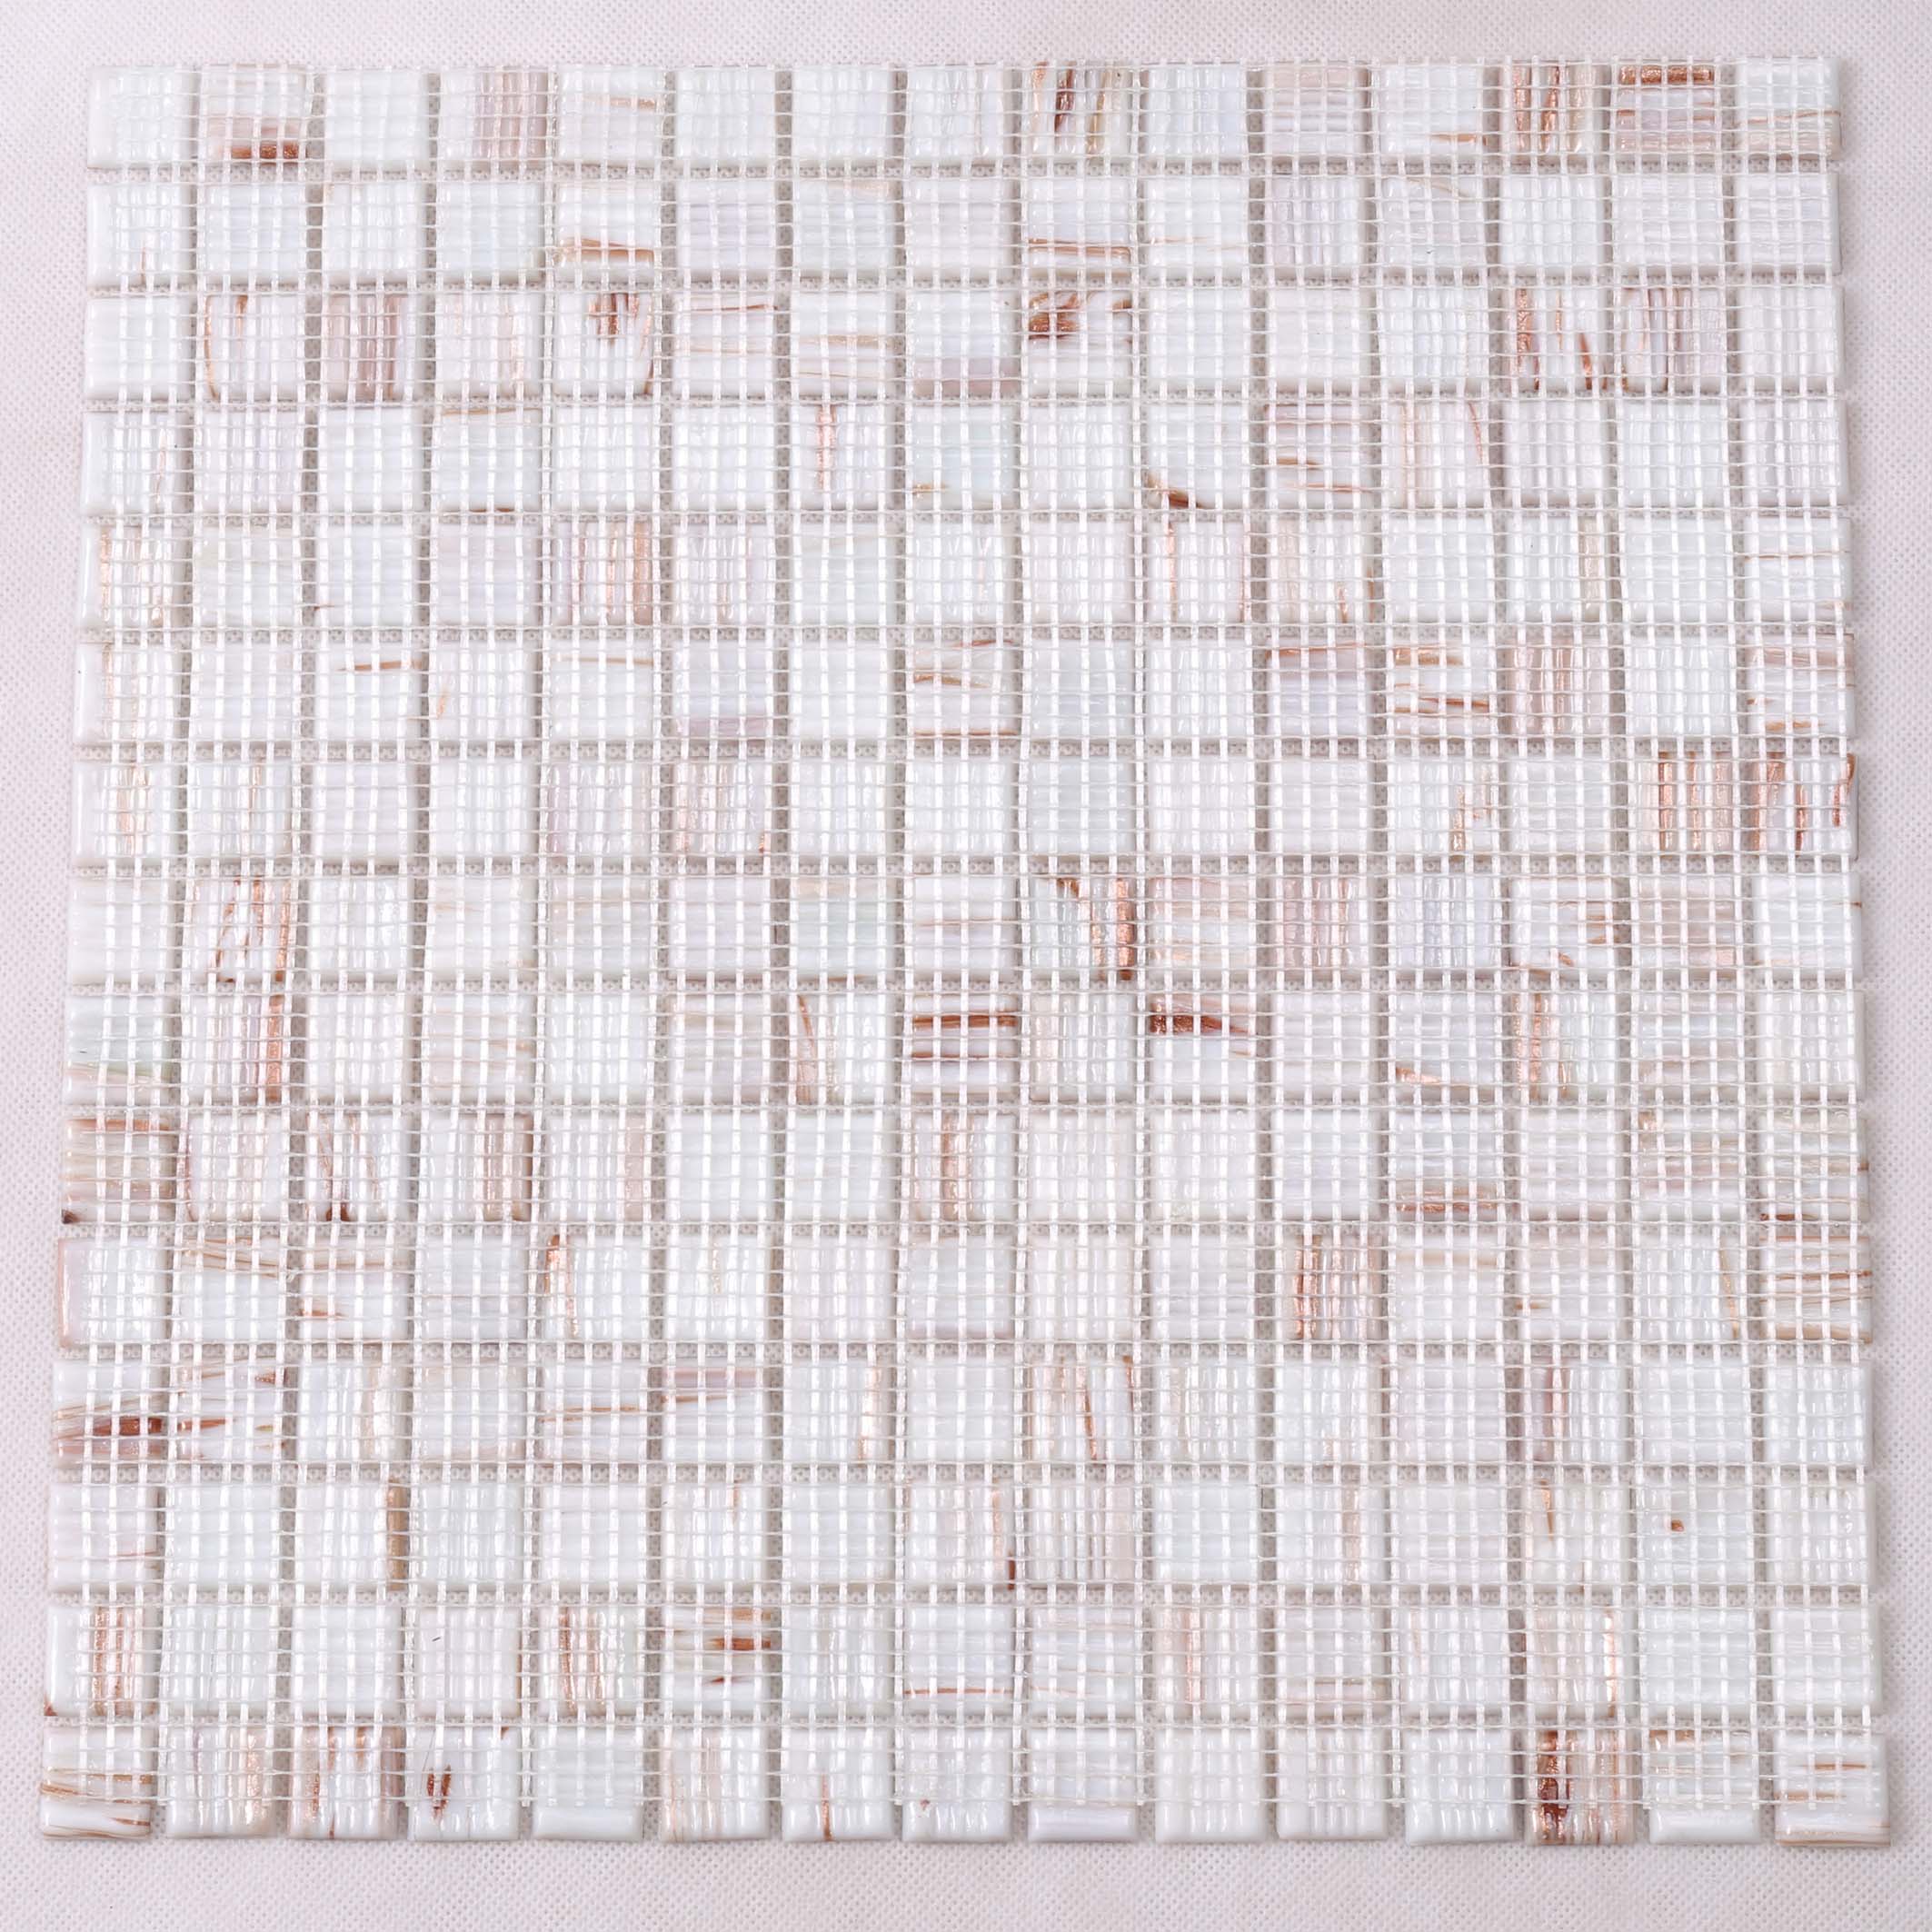 Heng Xing hand linear mosaic tile manufacturers for bathroom-5